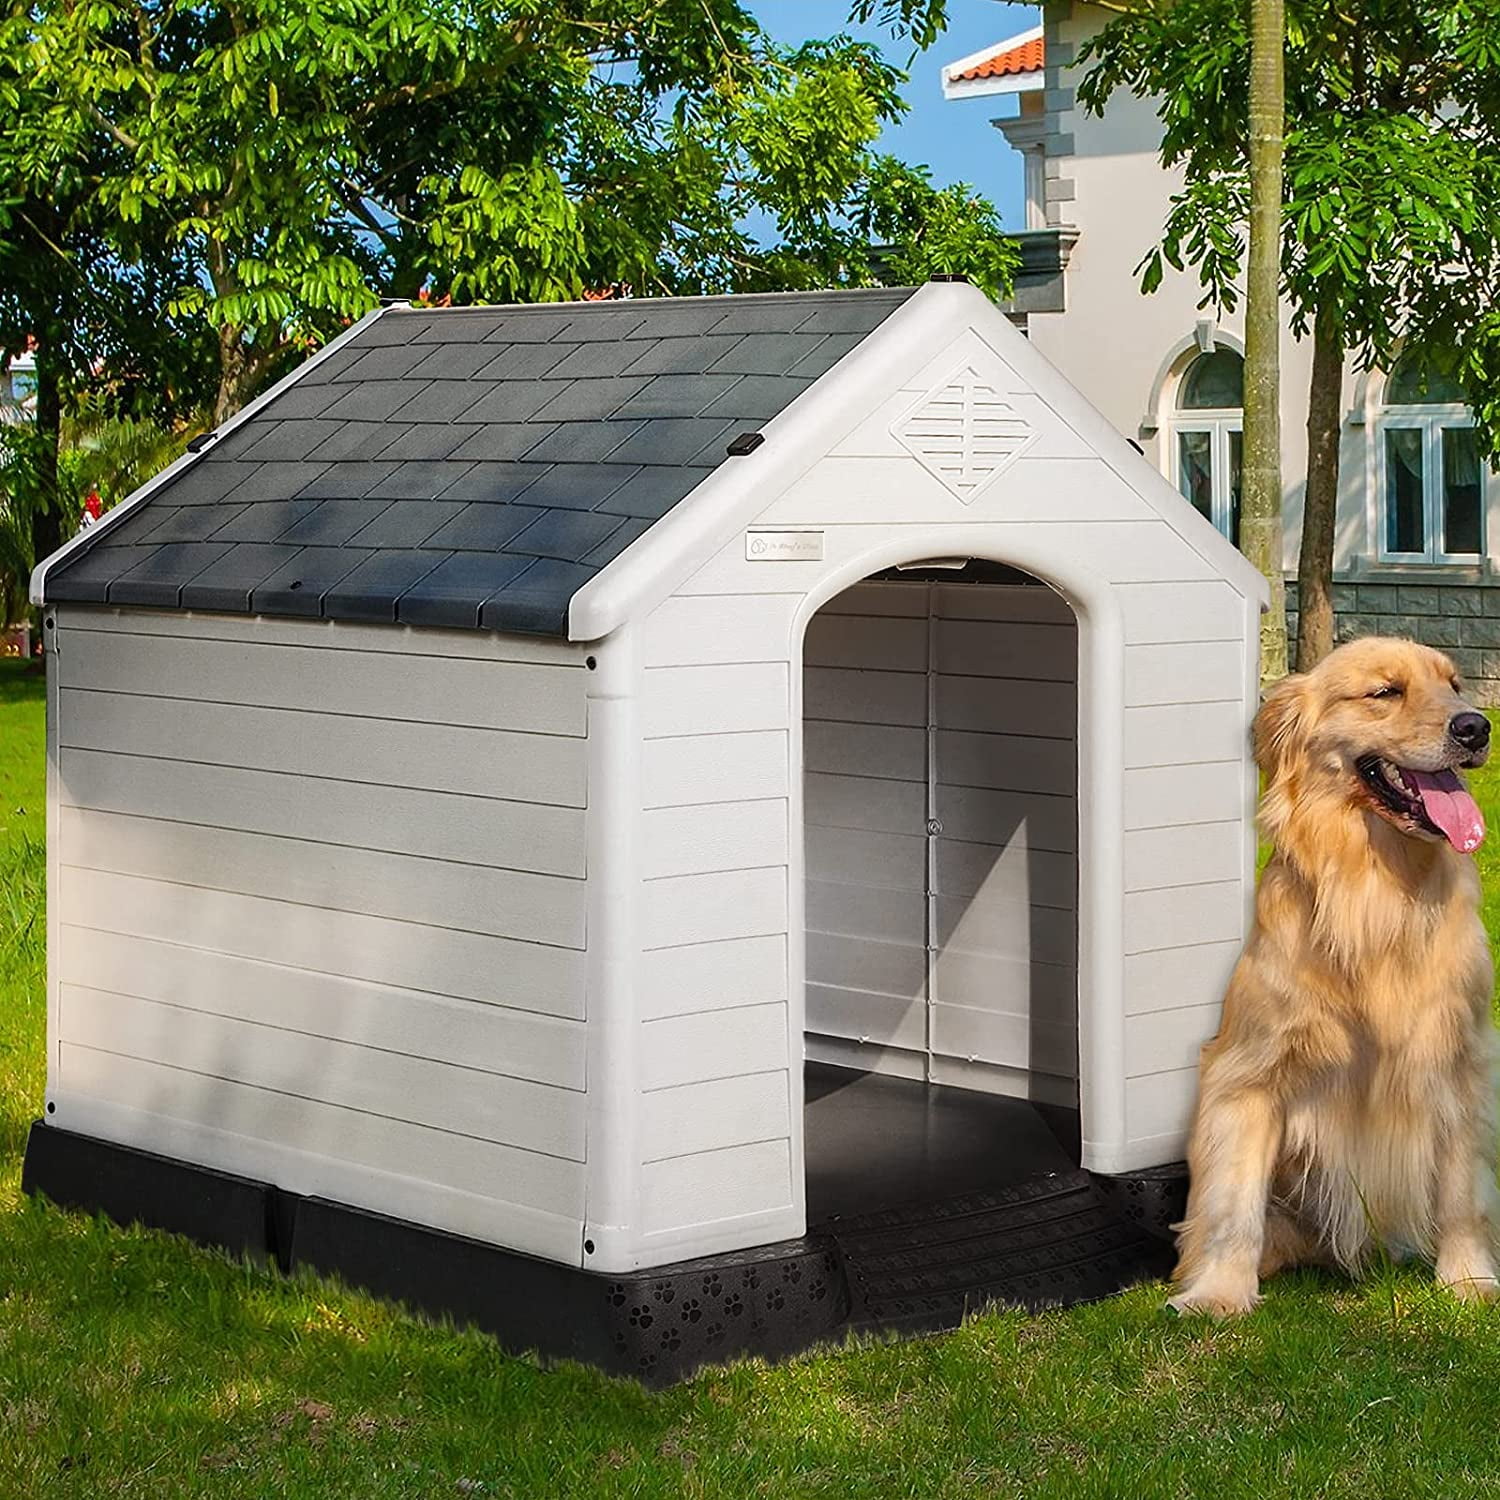 Qily Plastic Dog House Outdoor for Small Medium Dogs, Igloo Doghouse  Waterproof Resin with Openable Top & Elevated Floor, Durable Cat Puppy  Shelter